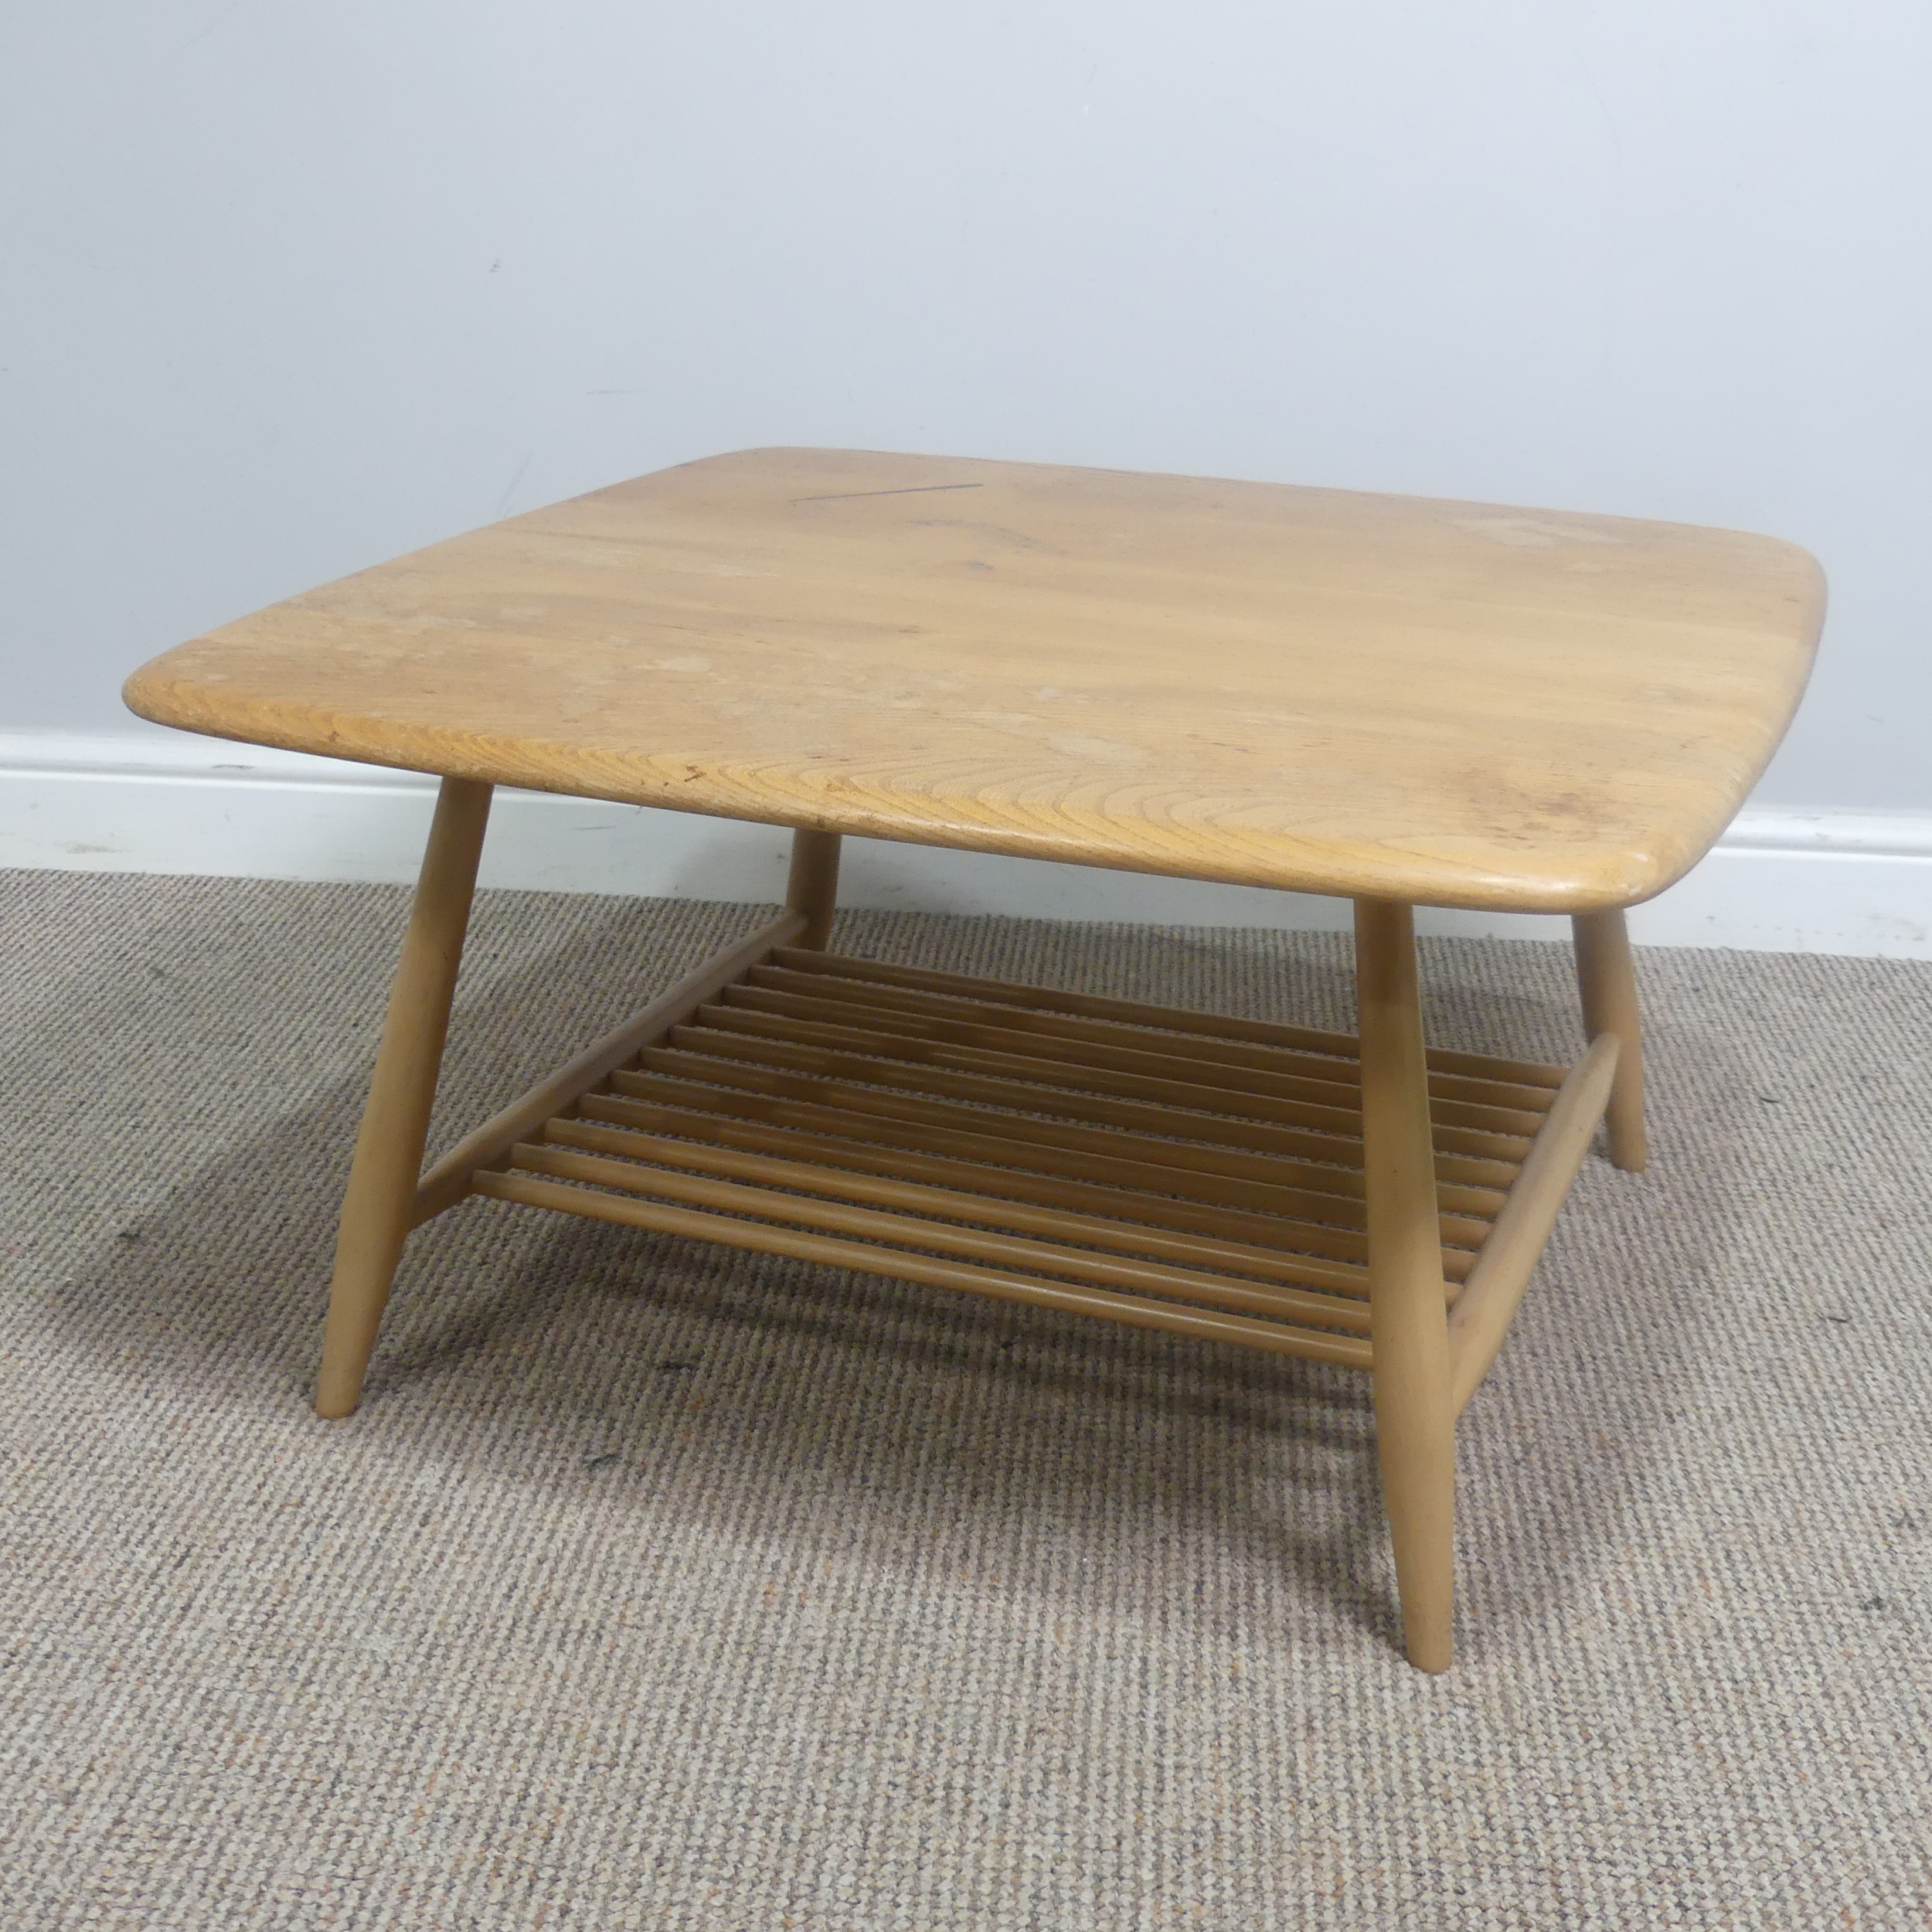 An Ercol windsor model 767 elm square coffee Table, with square top over splayed beach supports